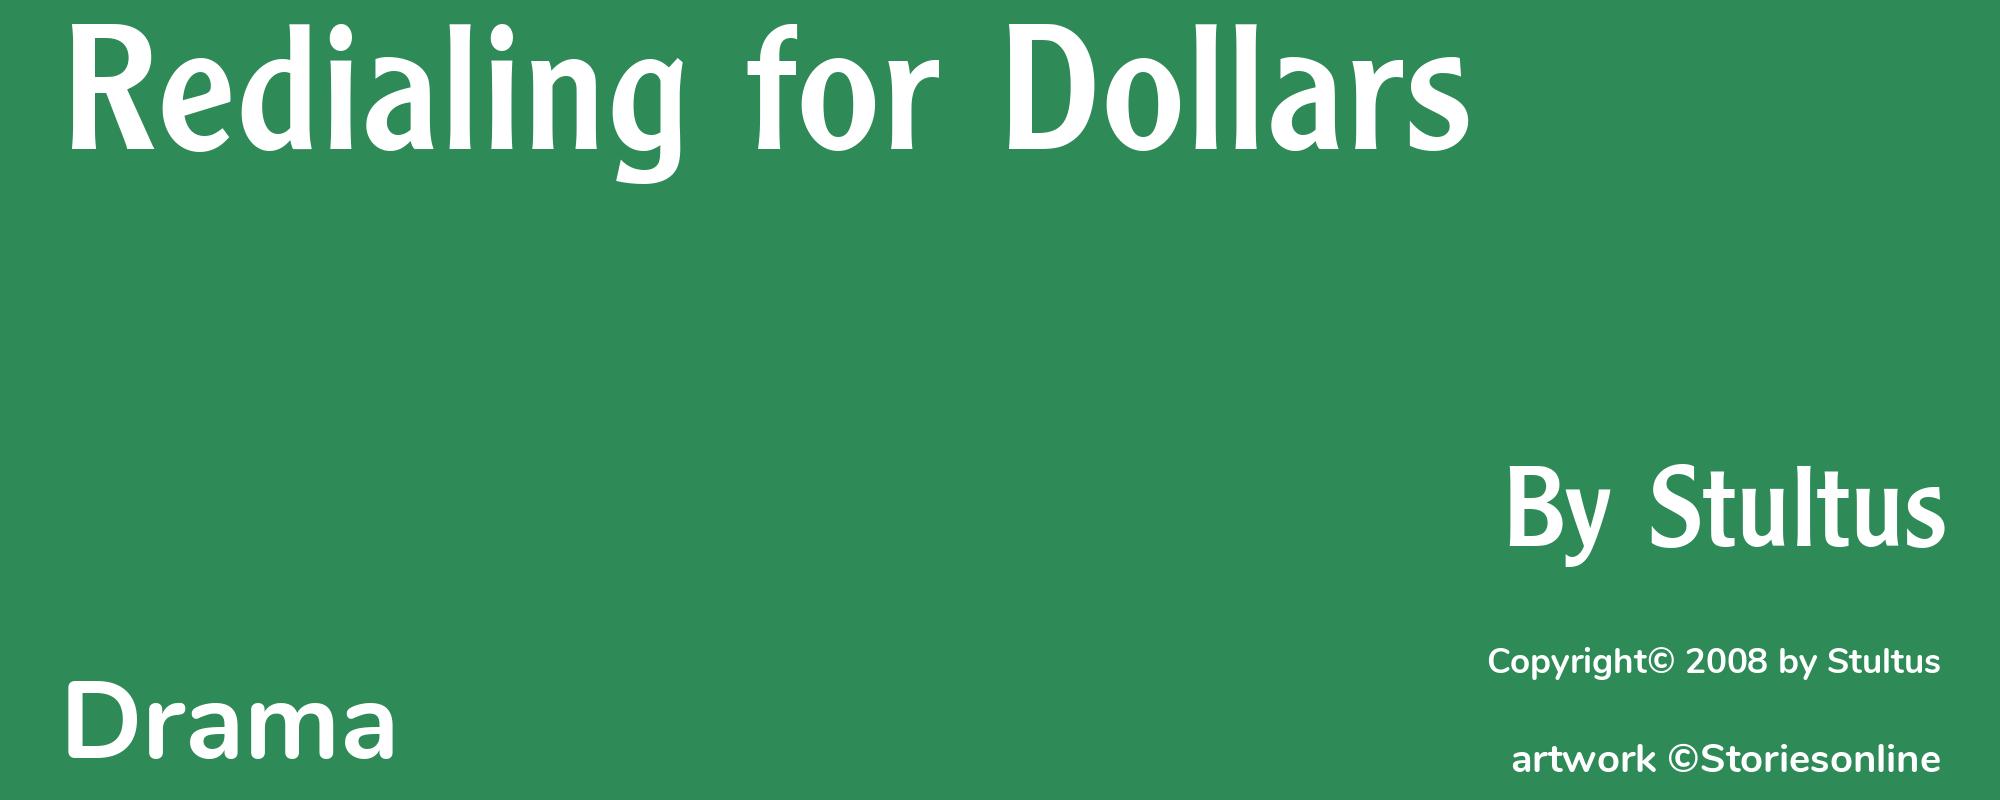 Redialing for Dollars - Cover